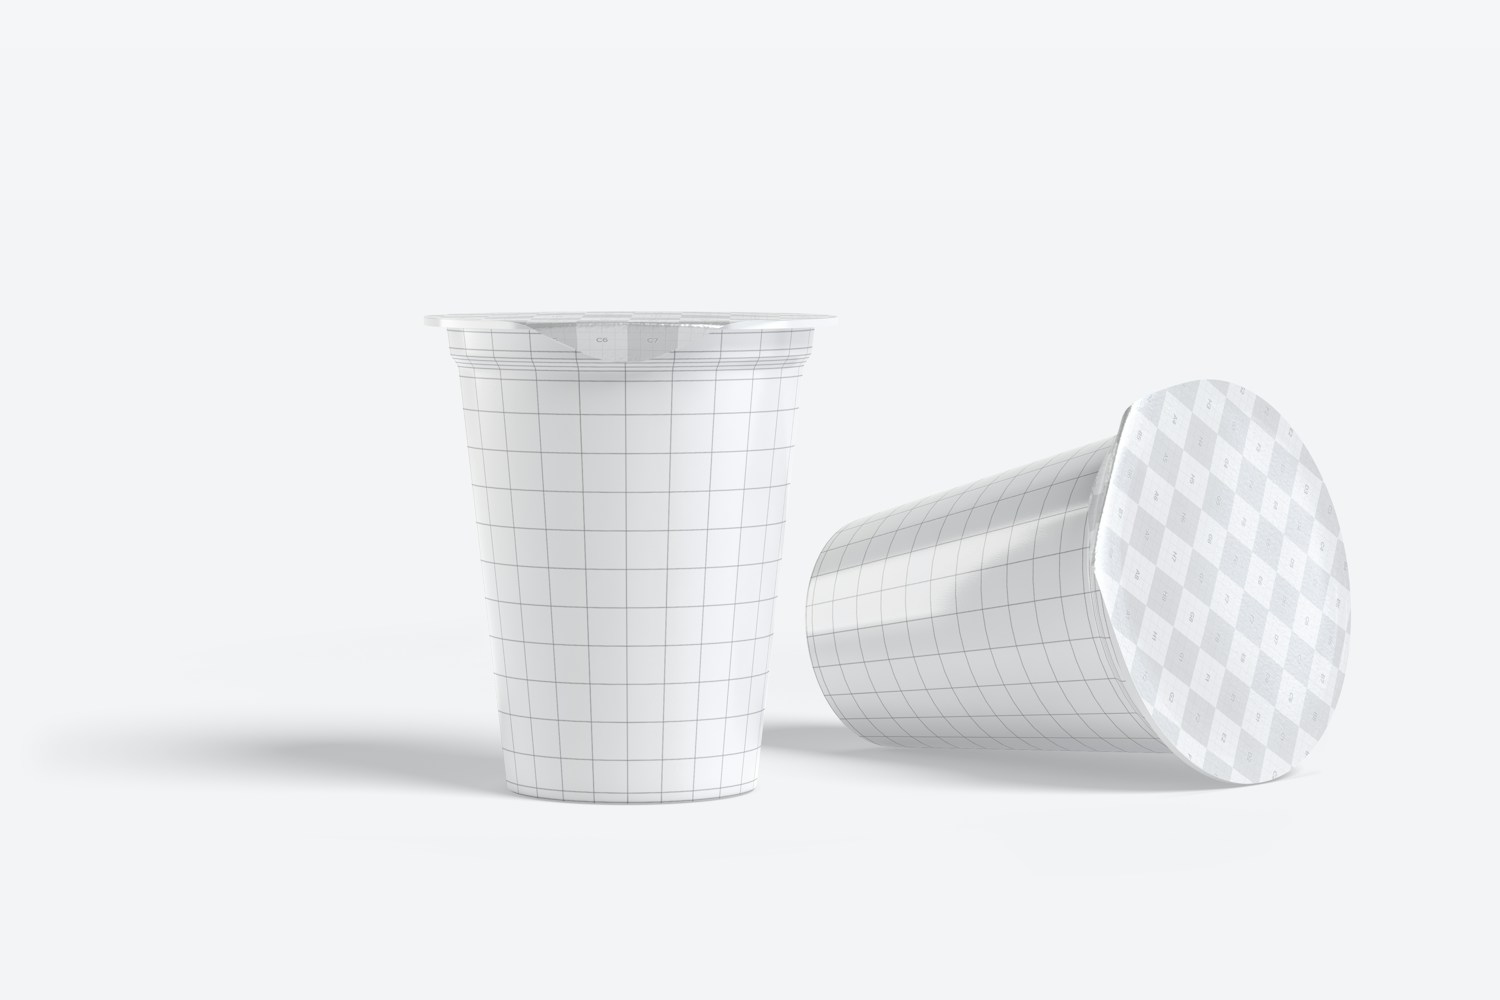 These are the areas of cups to display your designs.